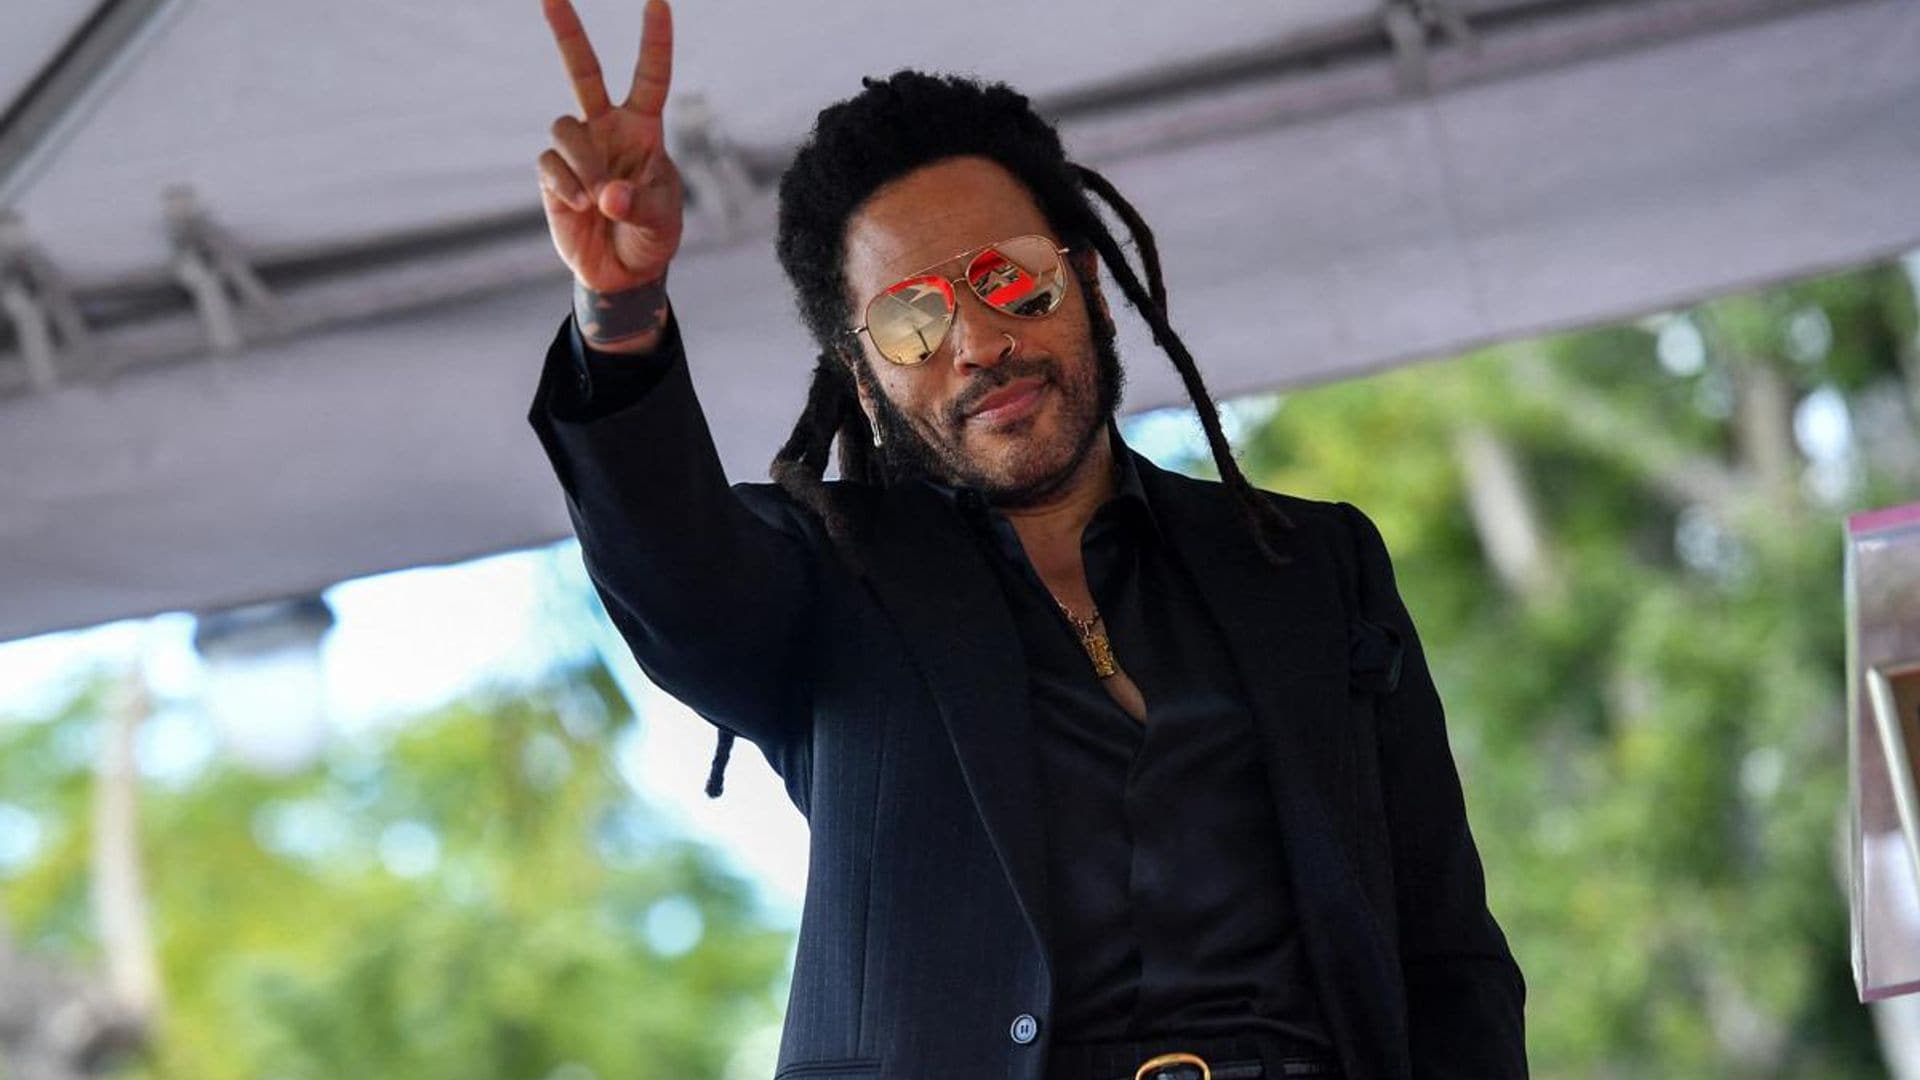 Lenny Kravitz looks incredible in new shirtless photos